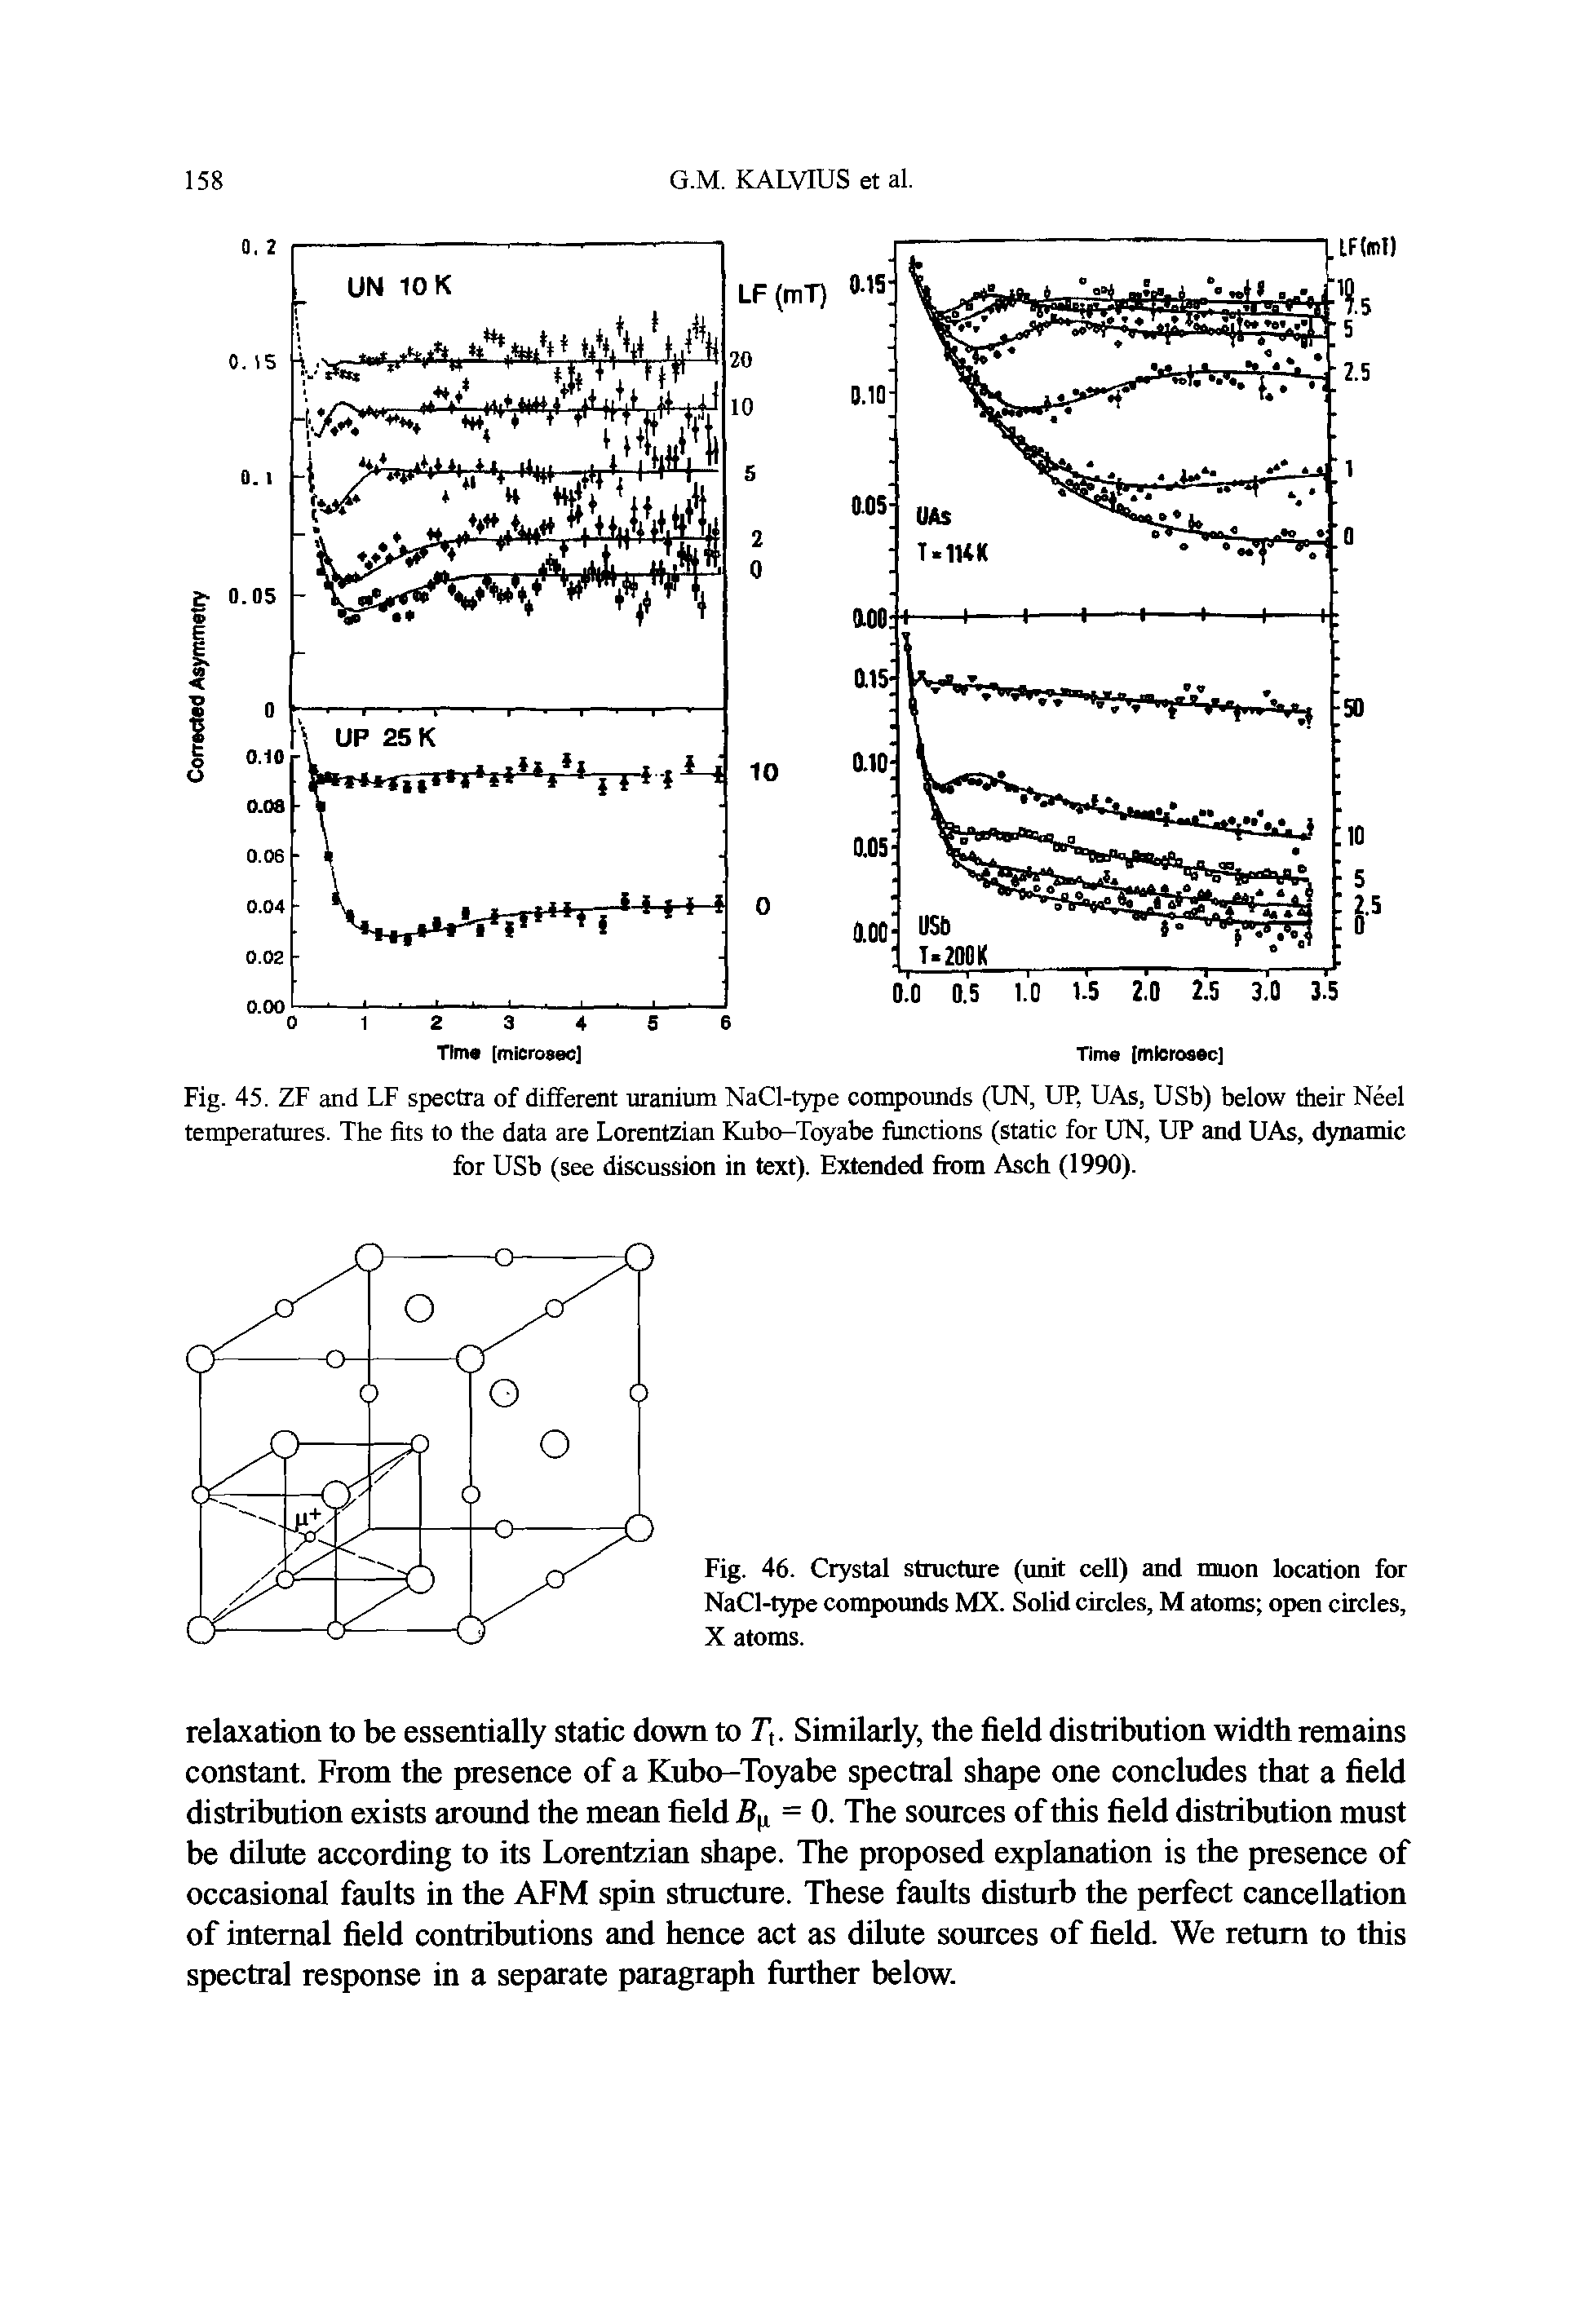 Fig. 45. ZF and LF spectra of different uranium NaCl-type compounds (UN, UP, UAs, USb) below their Neel temperatures. The fits to the data are Lorentzian Kubo-Toyabe functions (static for UN, UP and UAs, dynamic for USb (see discussion in text). Extended from Asch (1990).